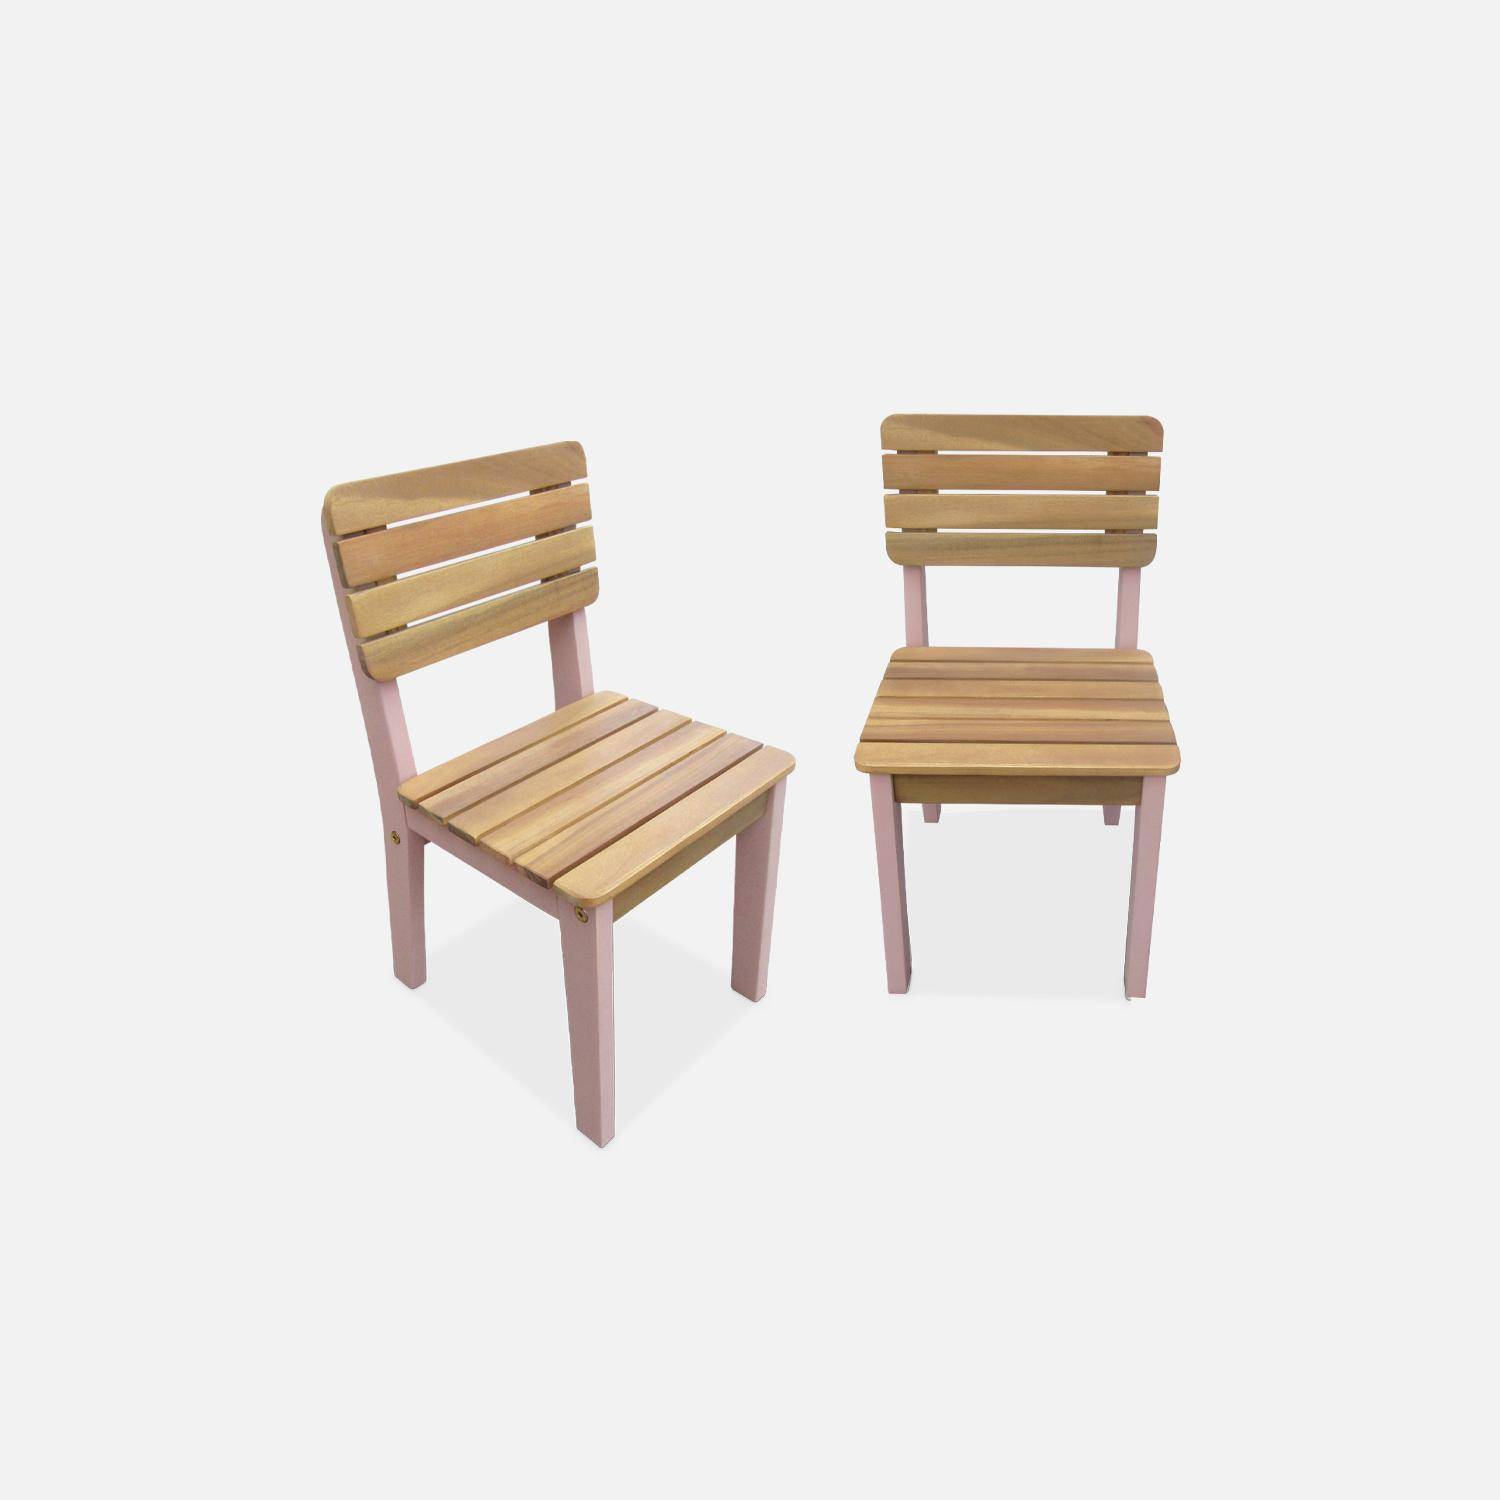 Solid Wood Chairs for Children, Indoor/Outdoor (Set of 2), pink, L29 x D31.5 x H53 cm Photo3